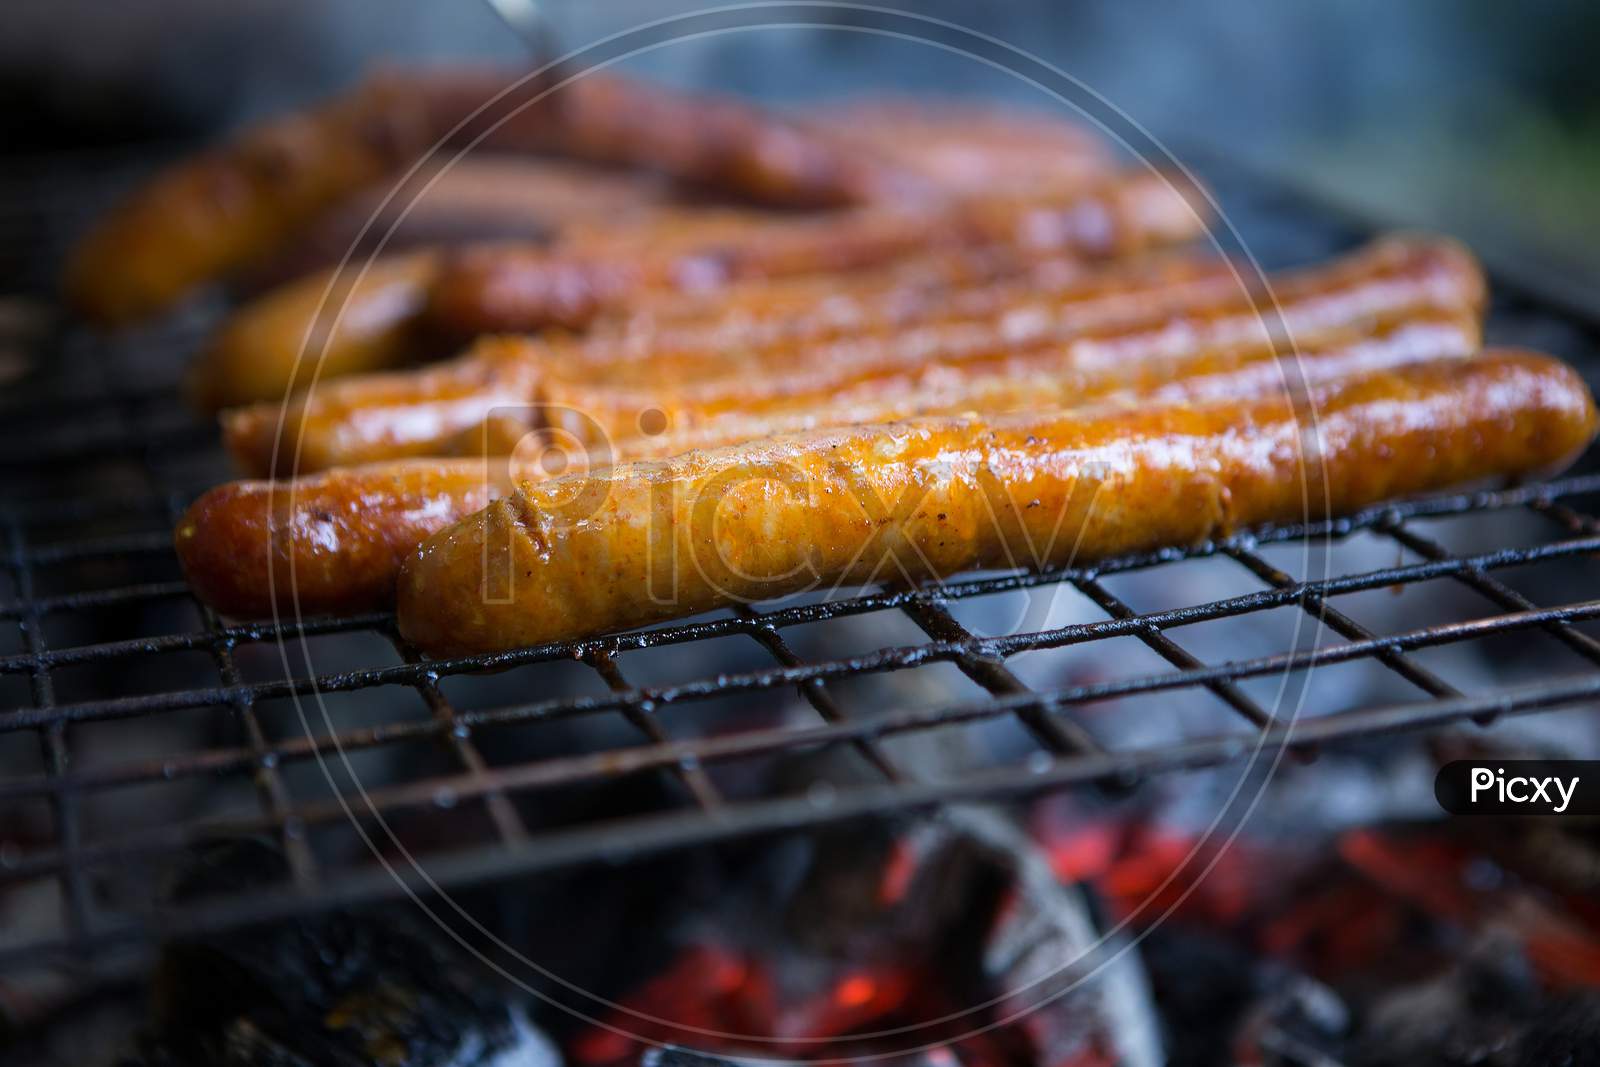 Delicious Sausages Are Grilled And Ready To Be Served To Guests.